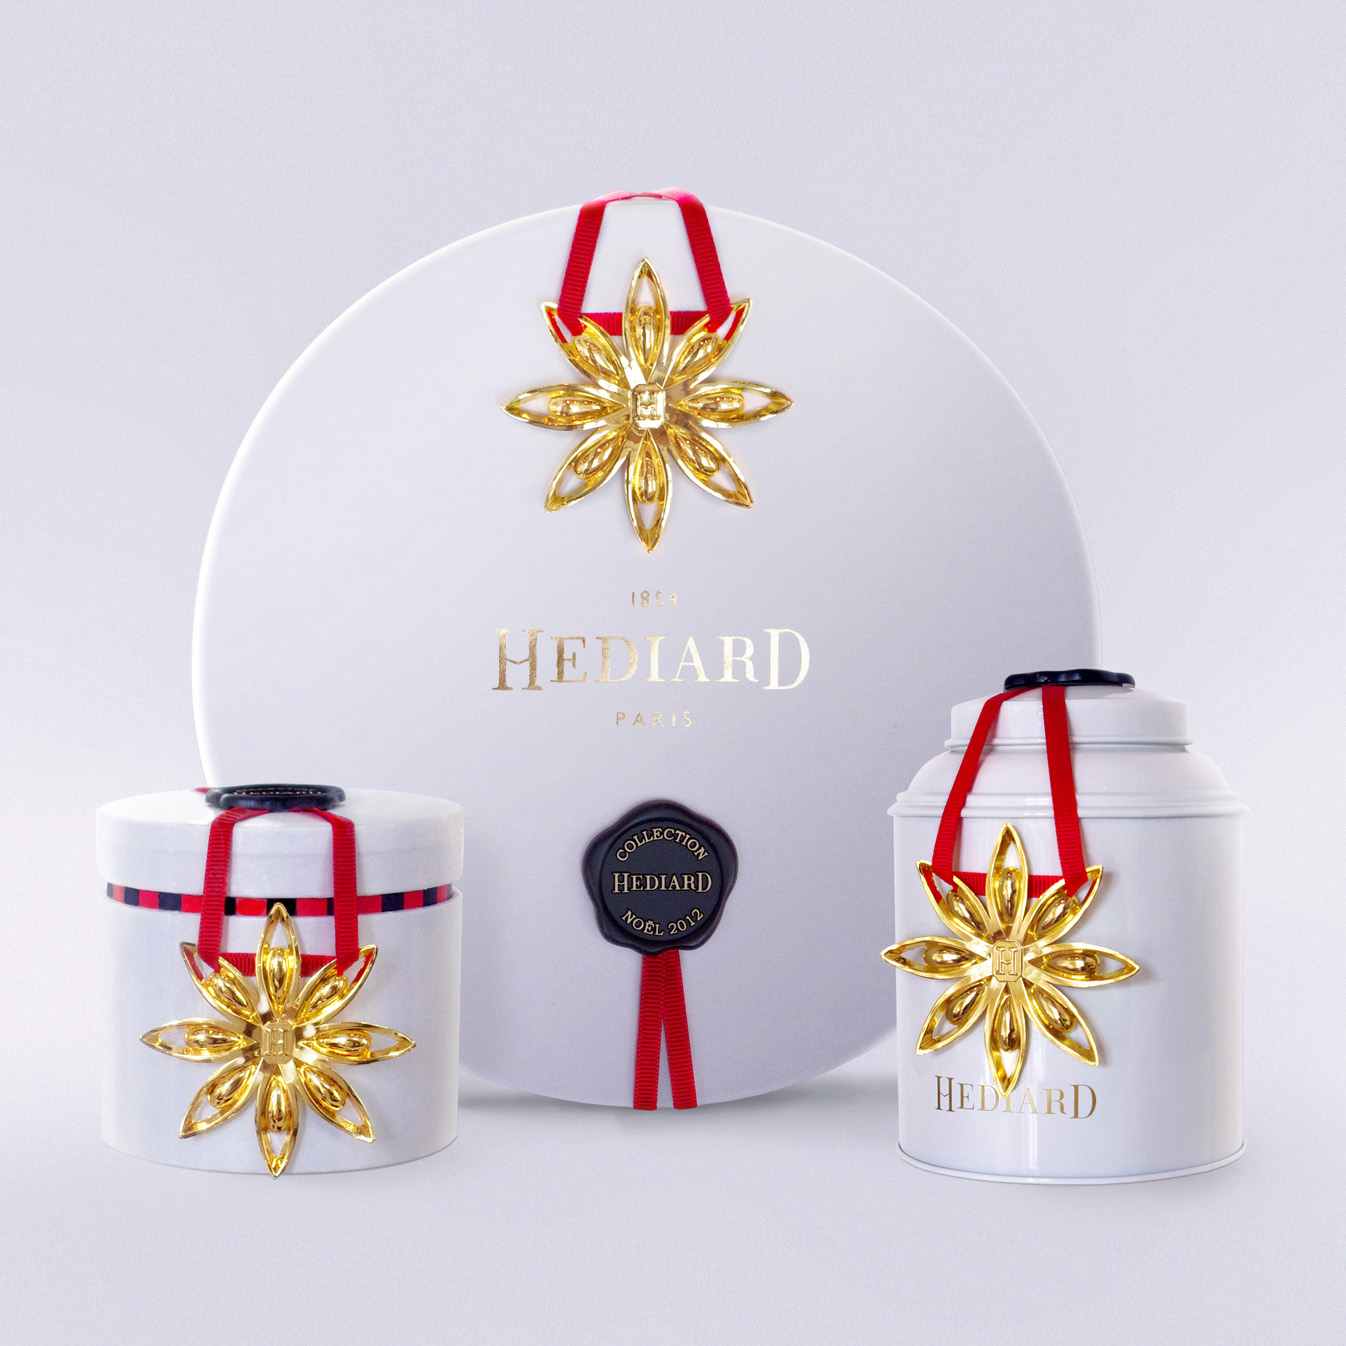 Star Anise Design and Christmas Packaging Collection by Delatour Design Paris